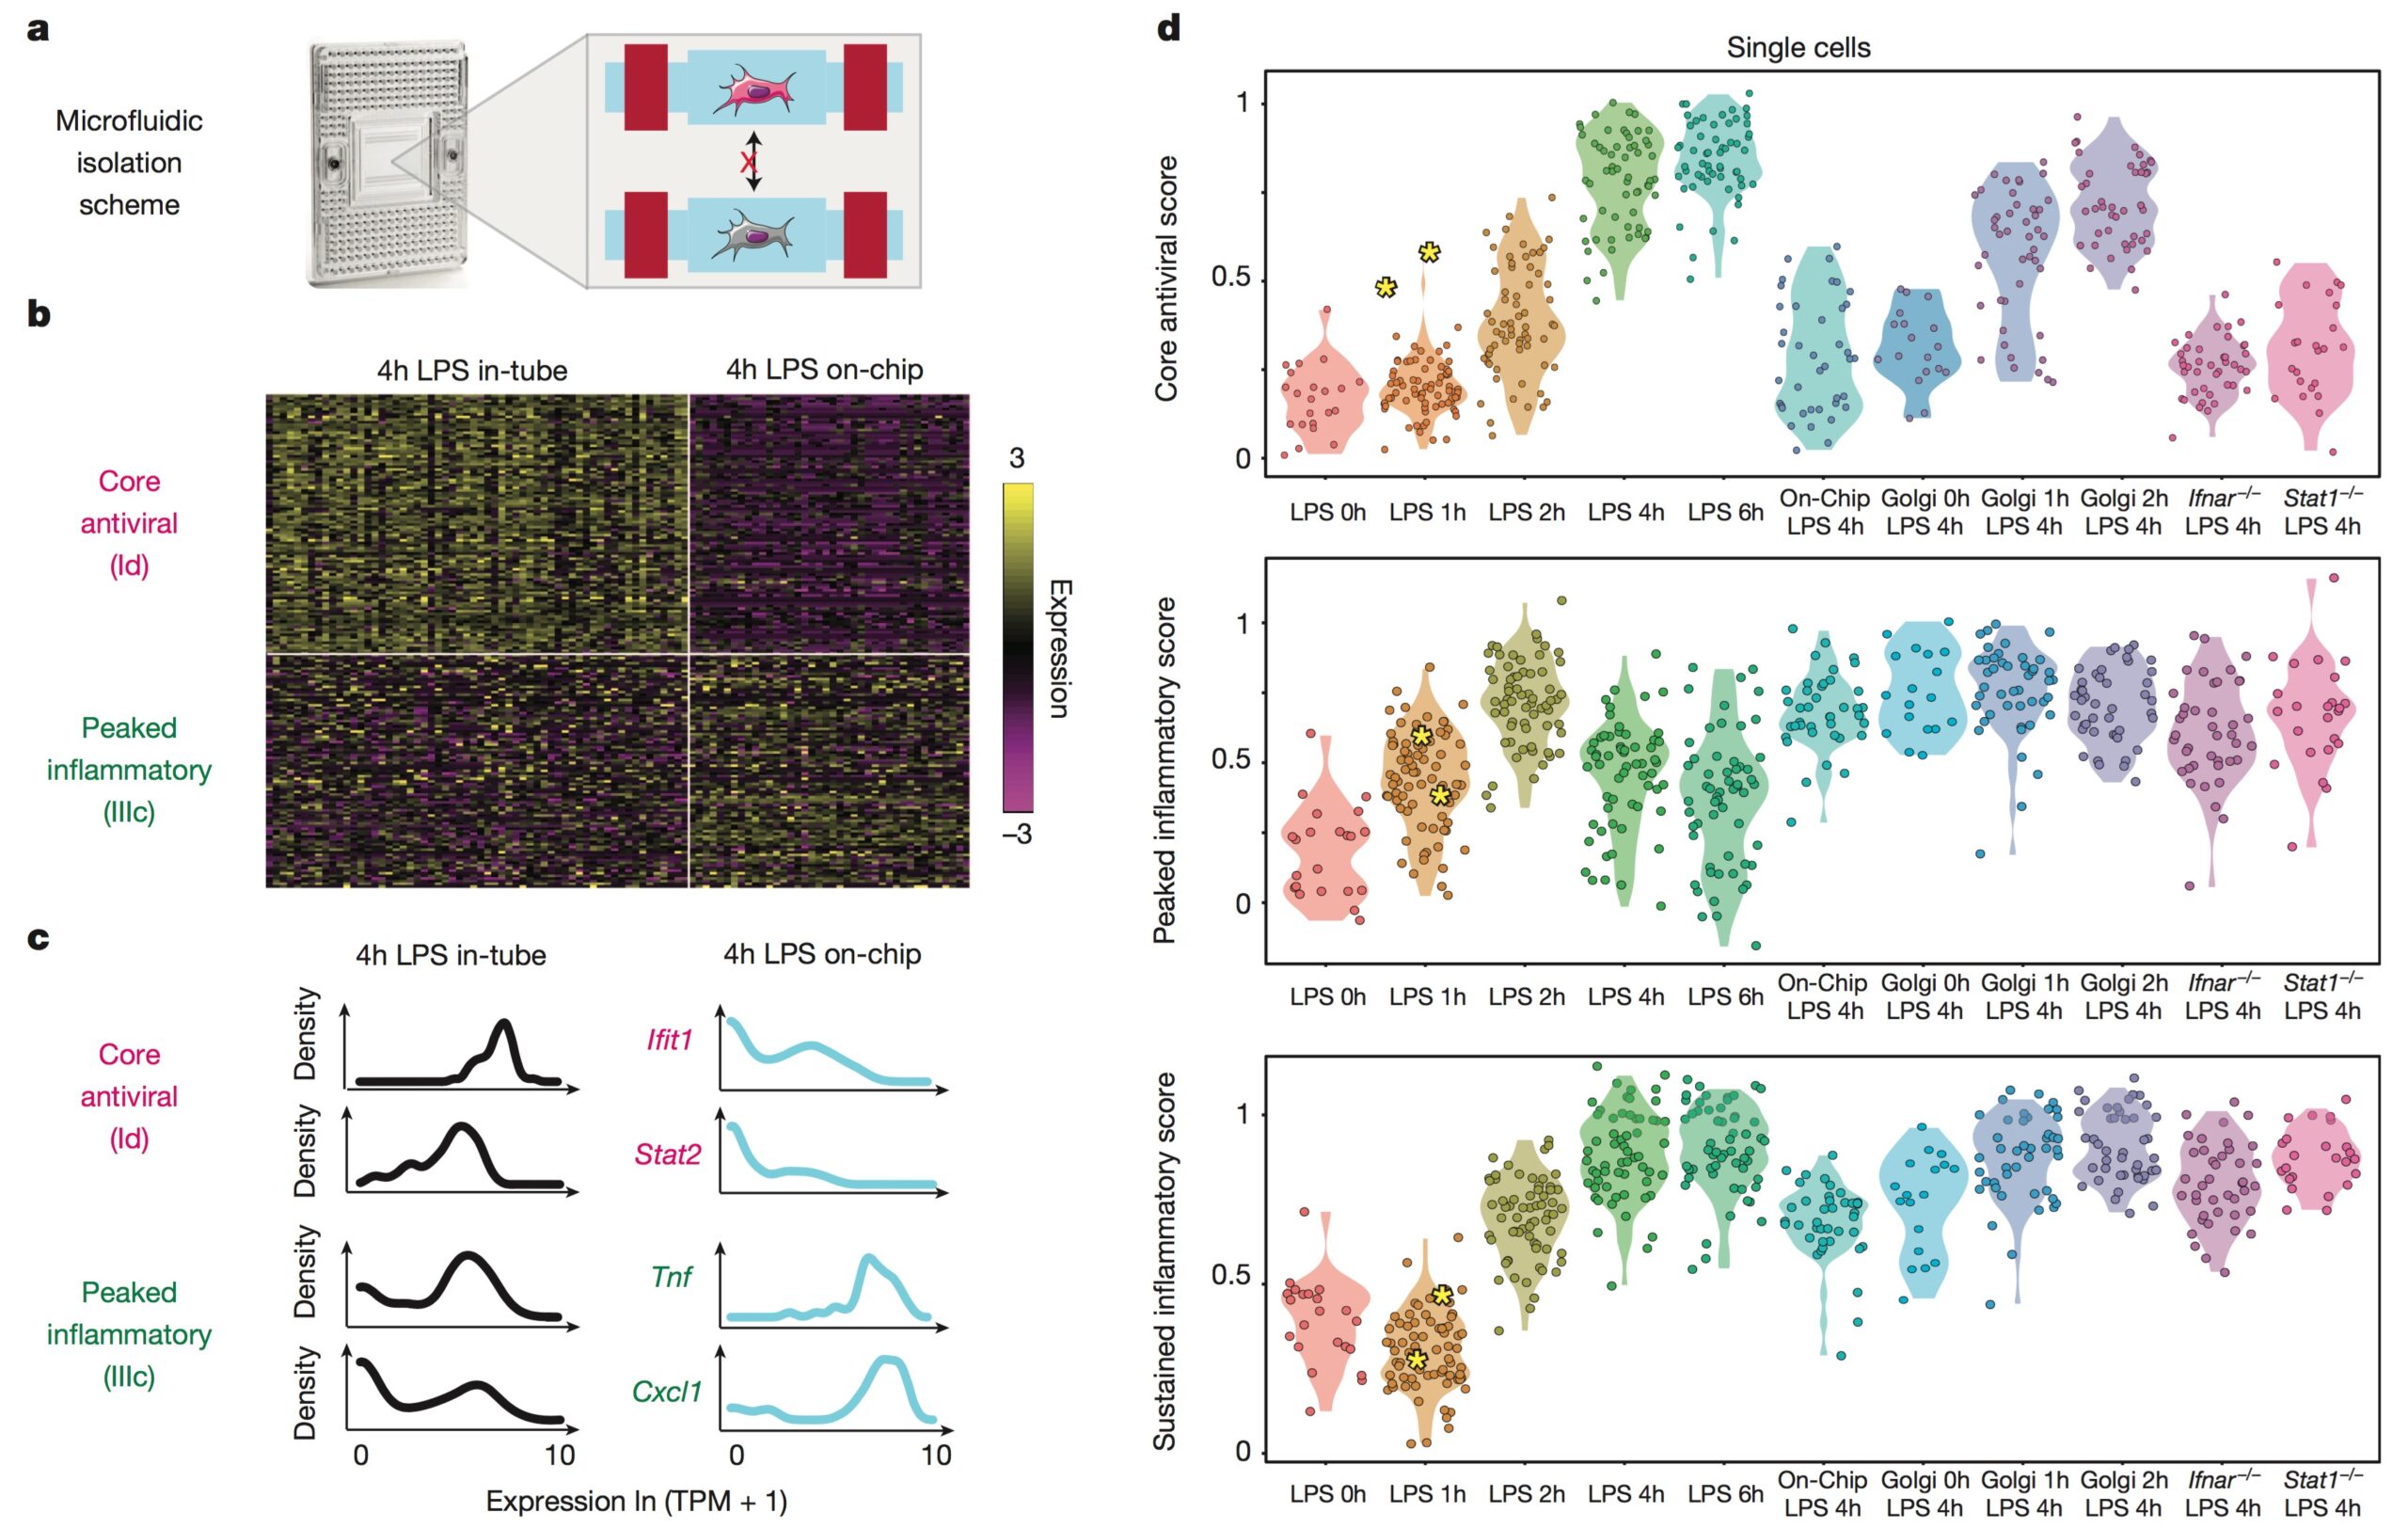 Modulating the microenvironments and signaling properties of single DCs with microfluidic, genetic, and chemical methods reveals how ensemble DC responses to LPS emerge through paracrine signaling waves. (Shalek et al., Nature, 2014).